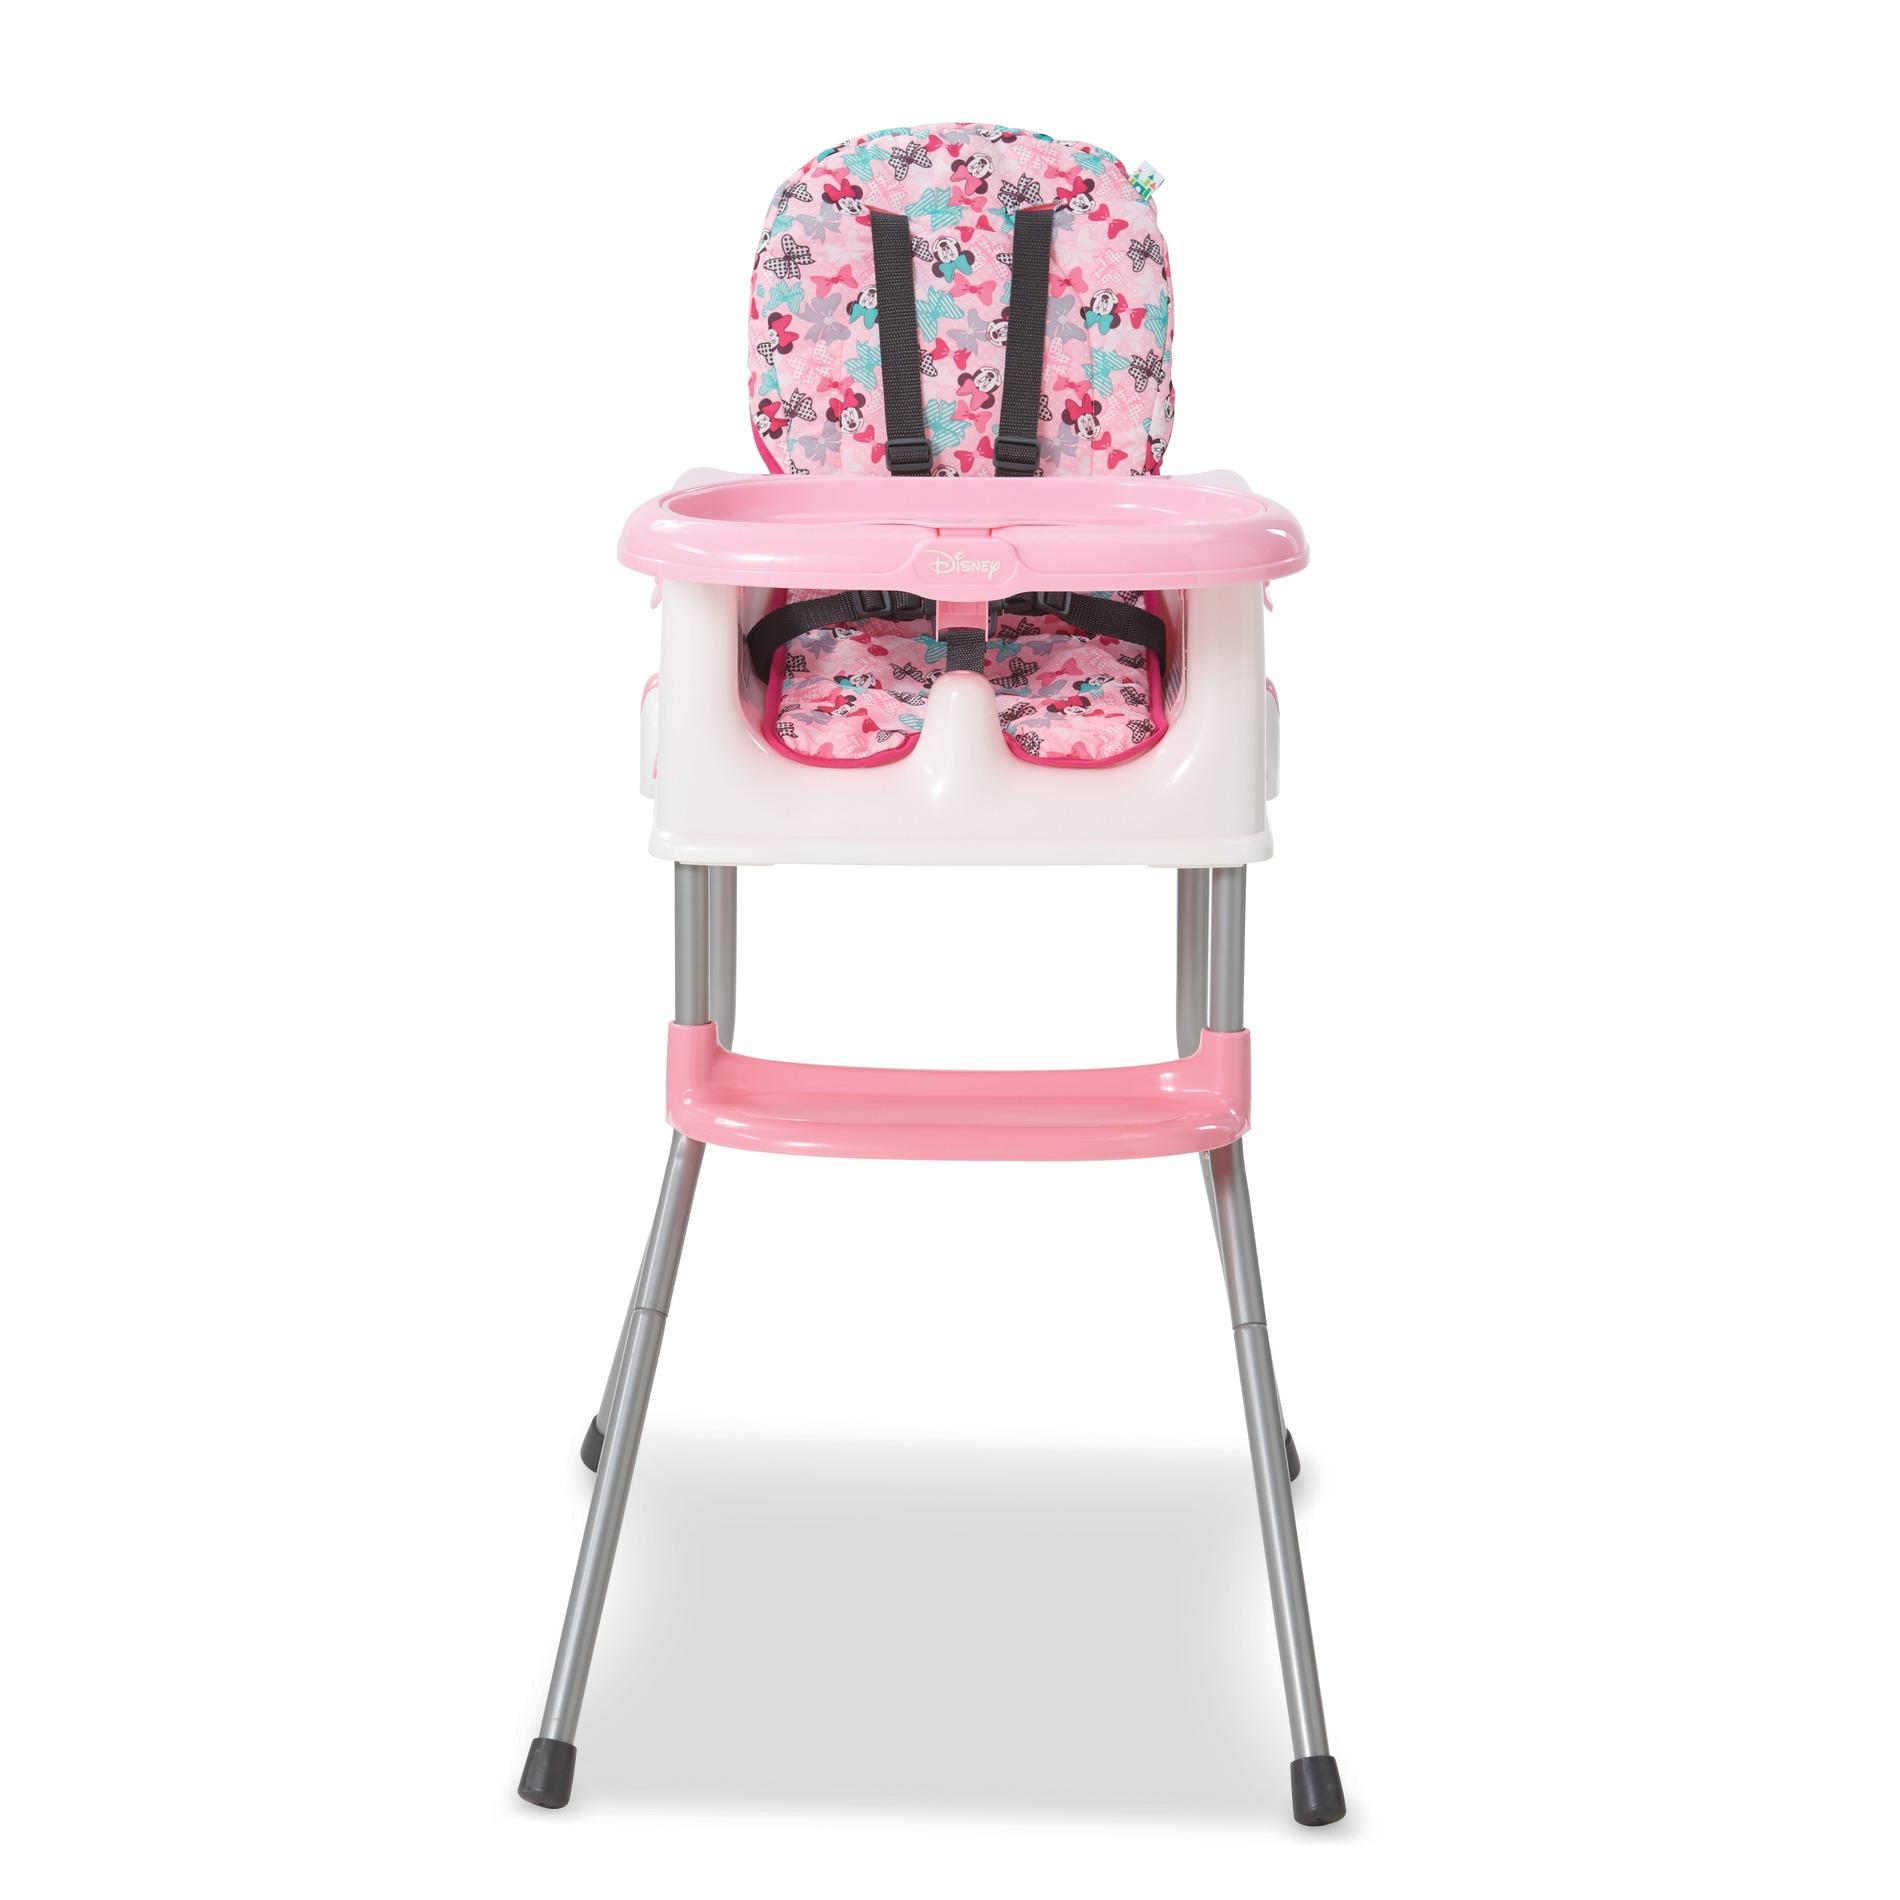 Pink High Chairs \u0026 Boosters - Kmart